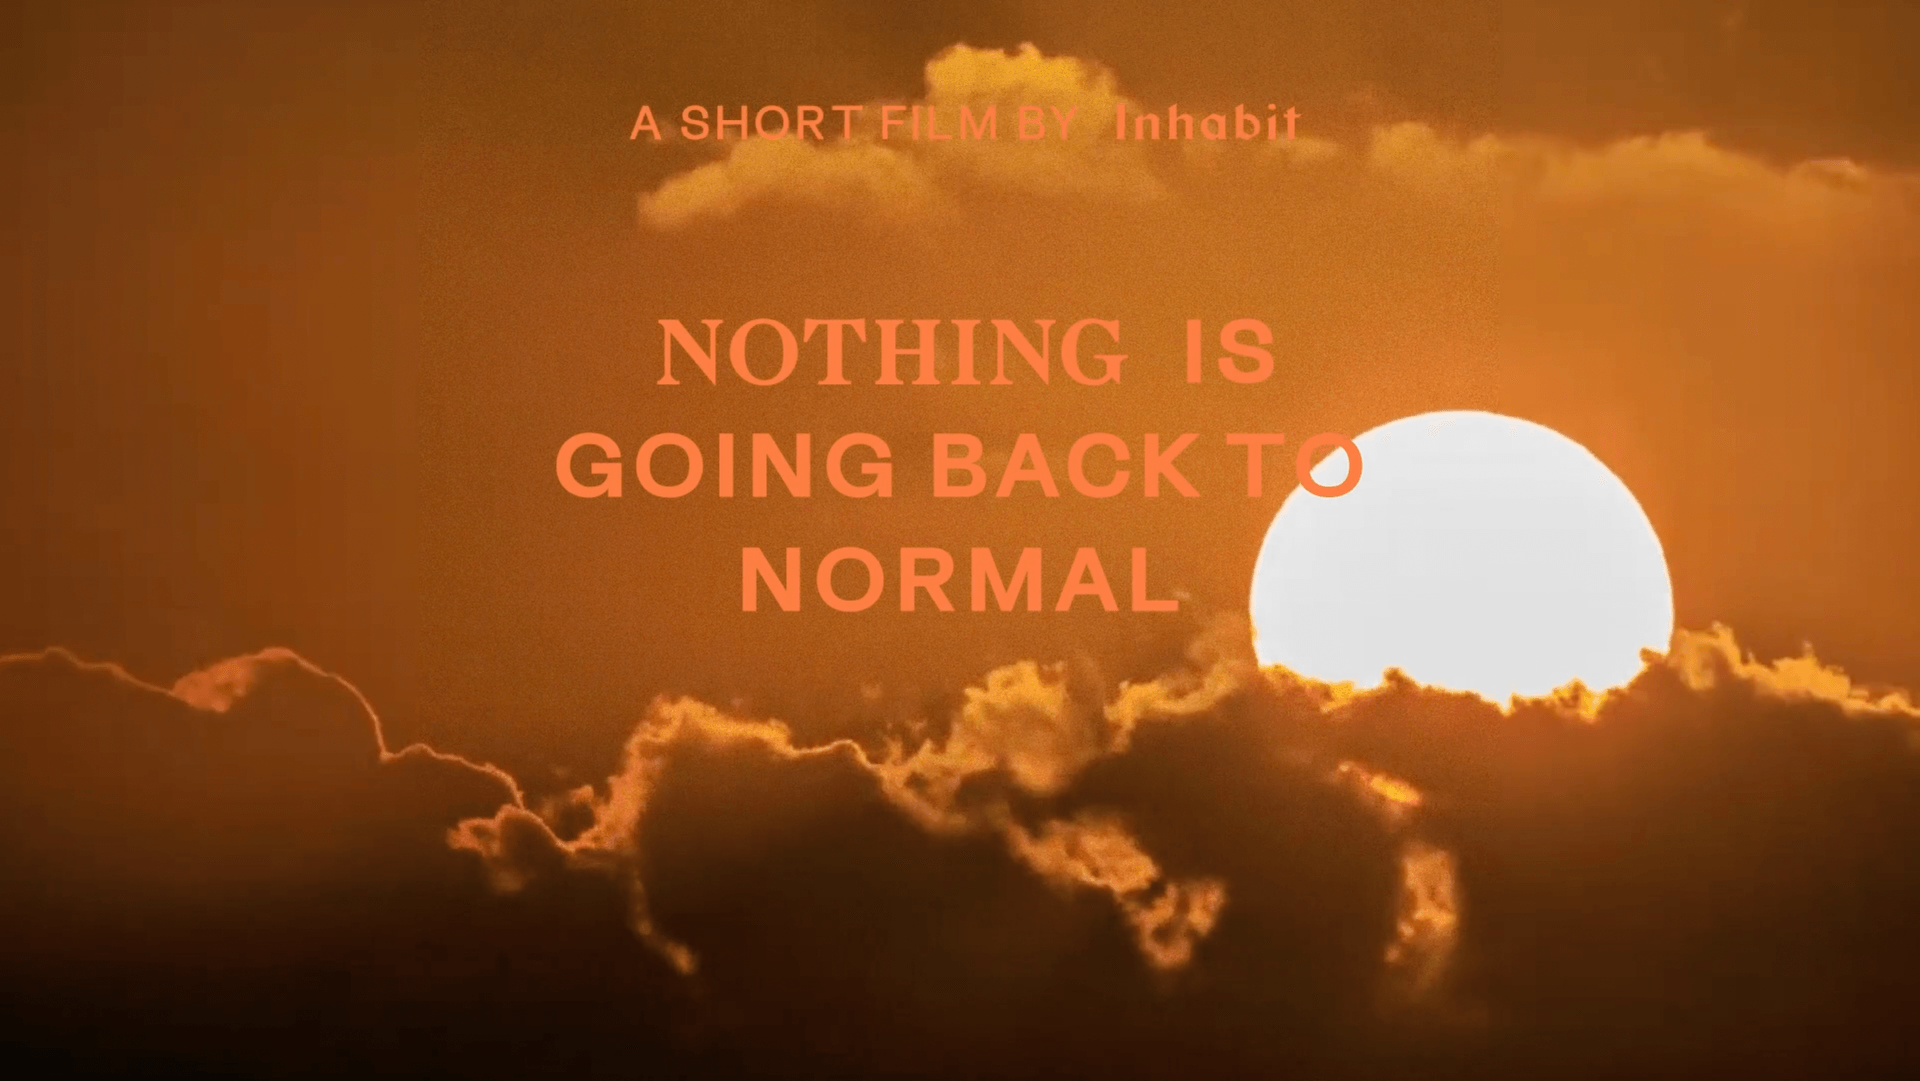 Title screen for the film 'Nothing is going back to normal'